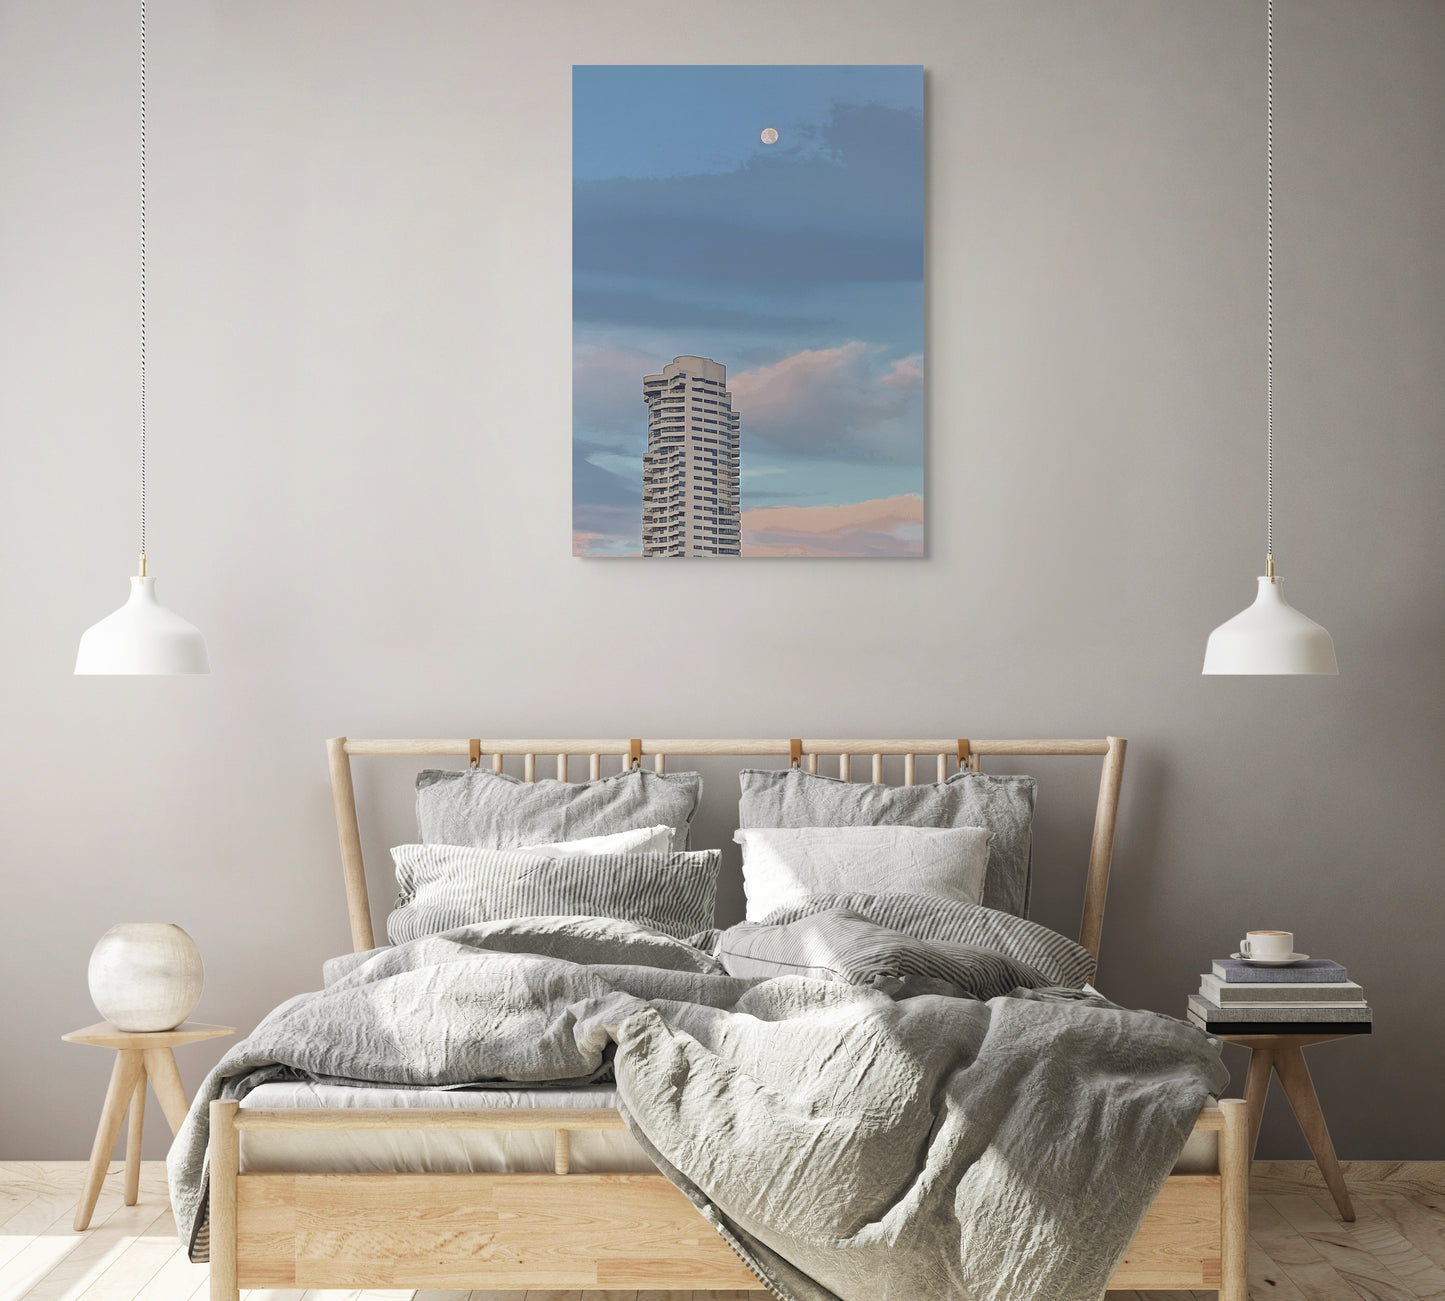 Cityscape at Dusk Canvas Wall Art in bedroom with grey wall and wooden bedframe and grey quilt and pillows